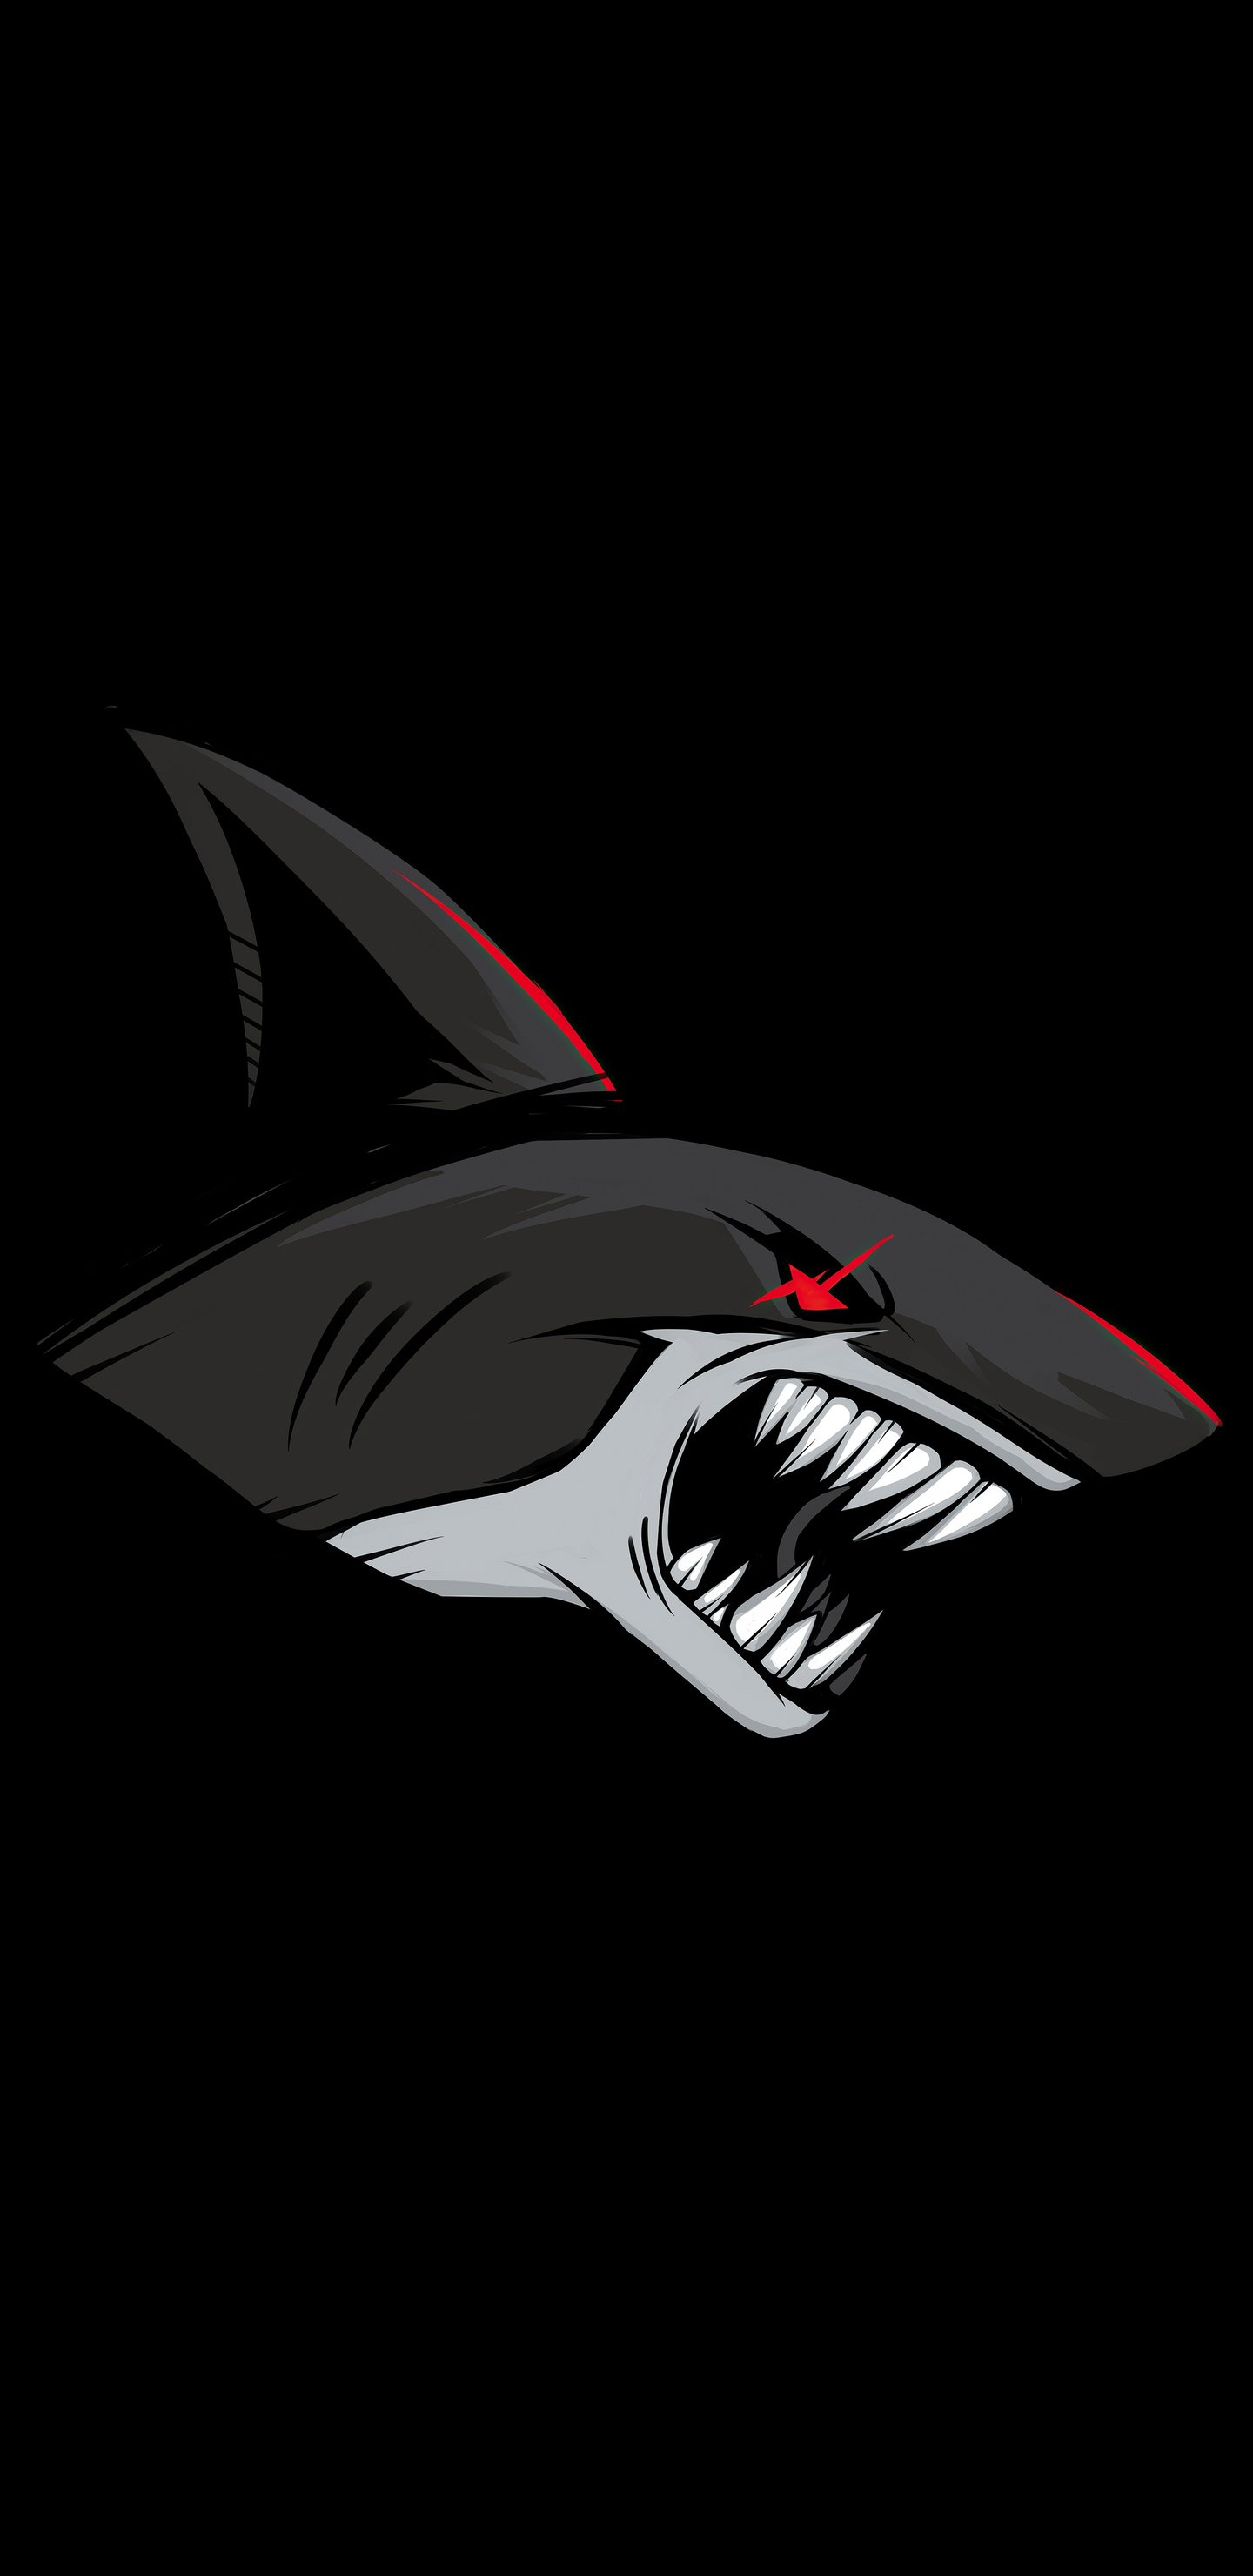 1440x2960 Shark Dark 5k Samsung Galaxy Note 9,8, S9,S8,S8+ QHD HD 4k  Wallpapers, Images, Backgrounds, Photos and Pictures